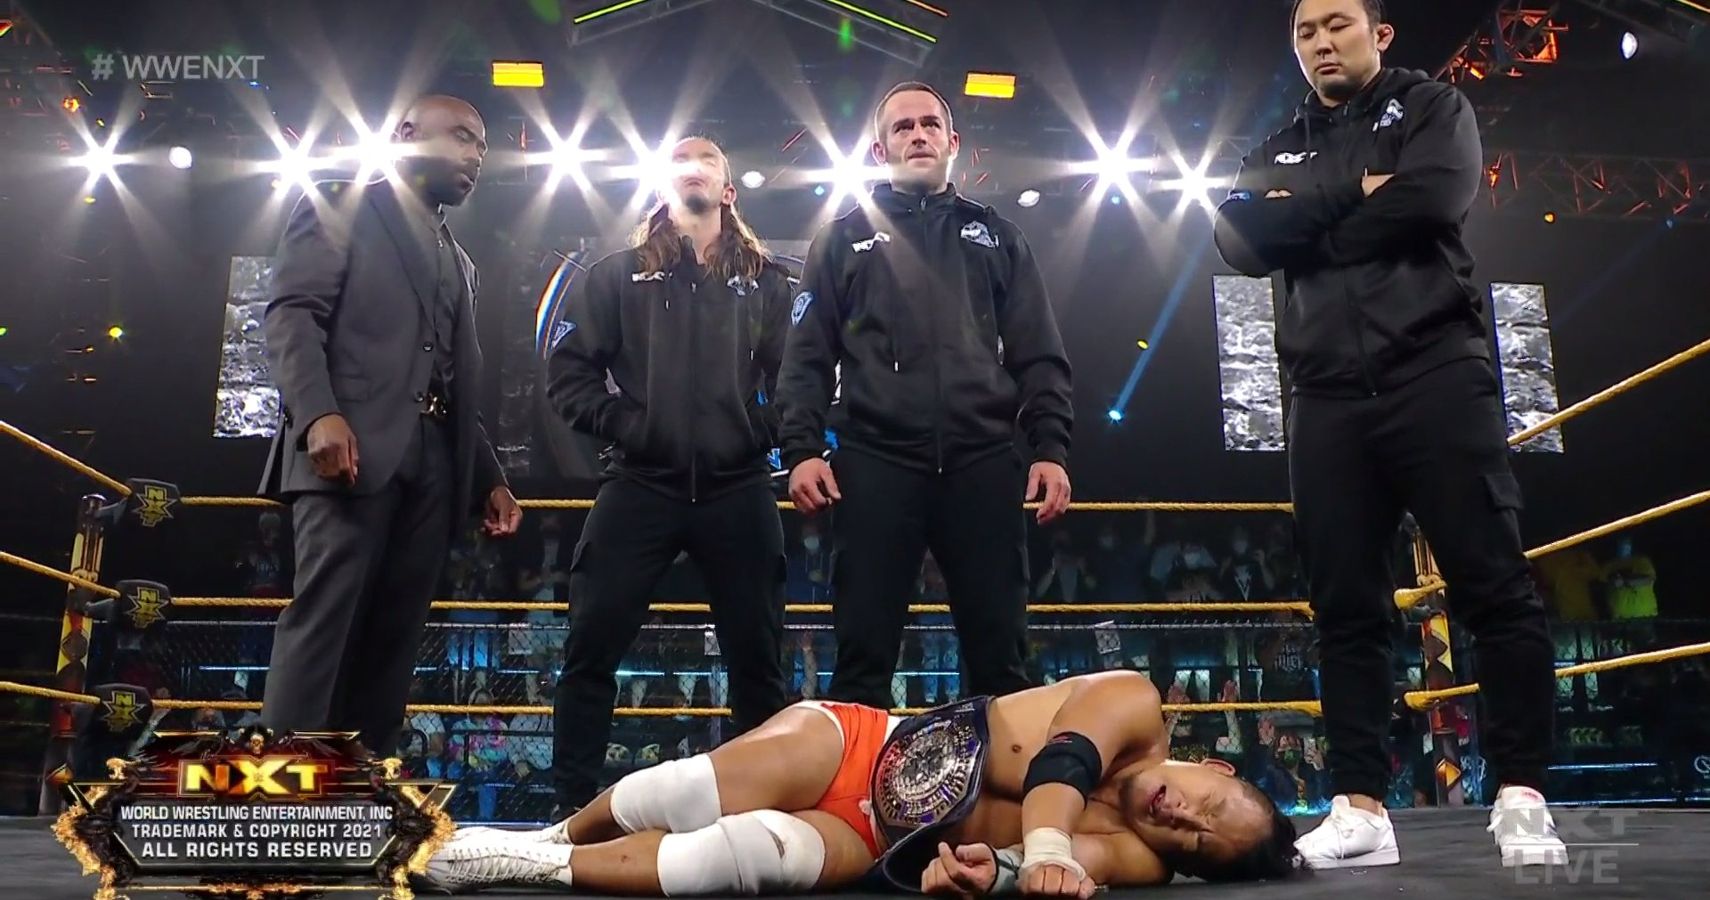 The Diamond Mine (Malcolm Bivens, Tyler Rust, Roderick Strong, and Hideki Suzuki) stand over Kushida after their NXT debut